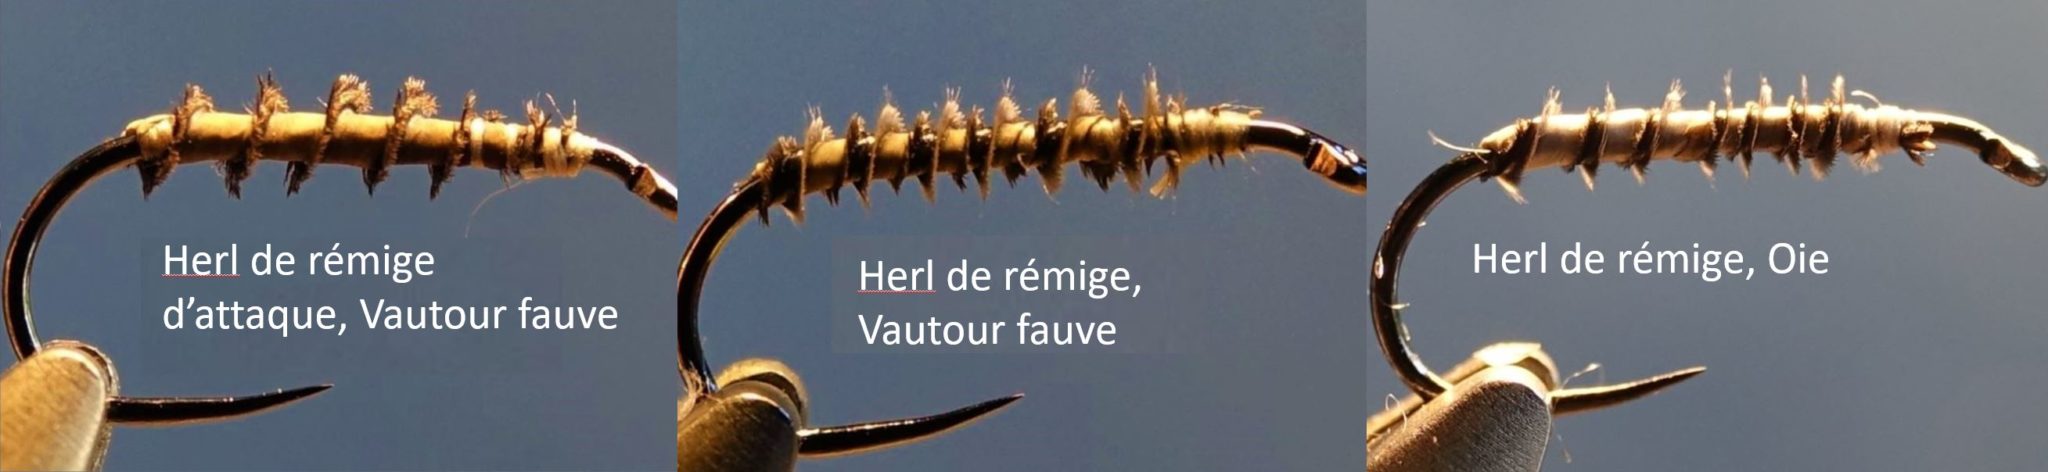 herl remige plume vautour oie mouche fly tying eclosion